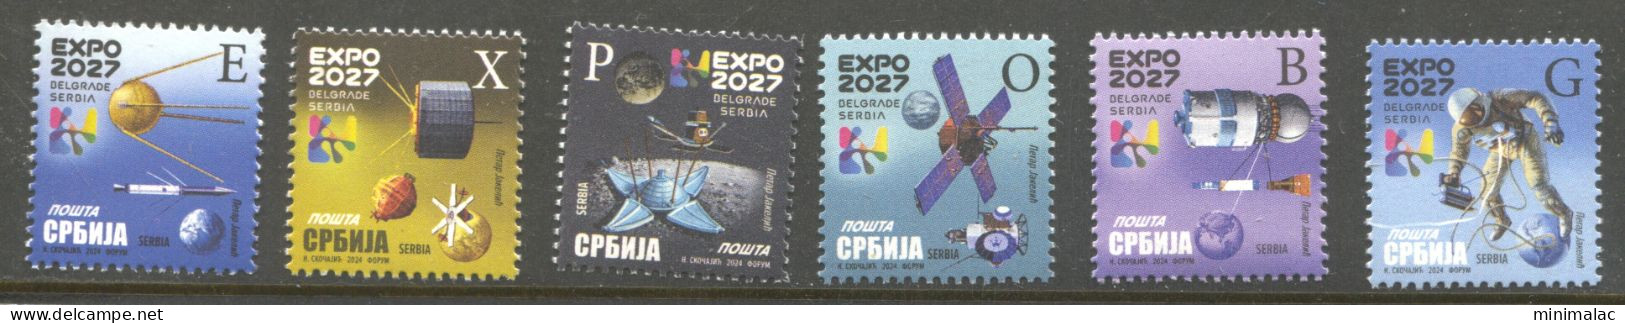 Serbia 2024, Definitive Postage Stamps Of The Republic Of Serbia 2024-2027, EXPO 2027, Space. Full Series 6 Pts, MNH - Serbien